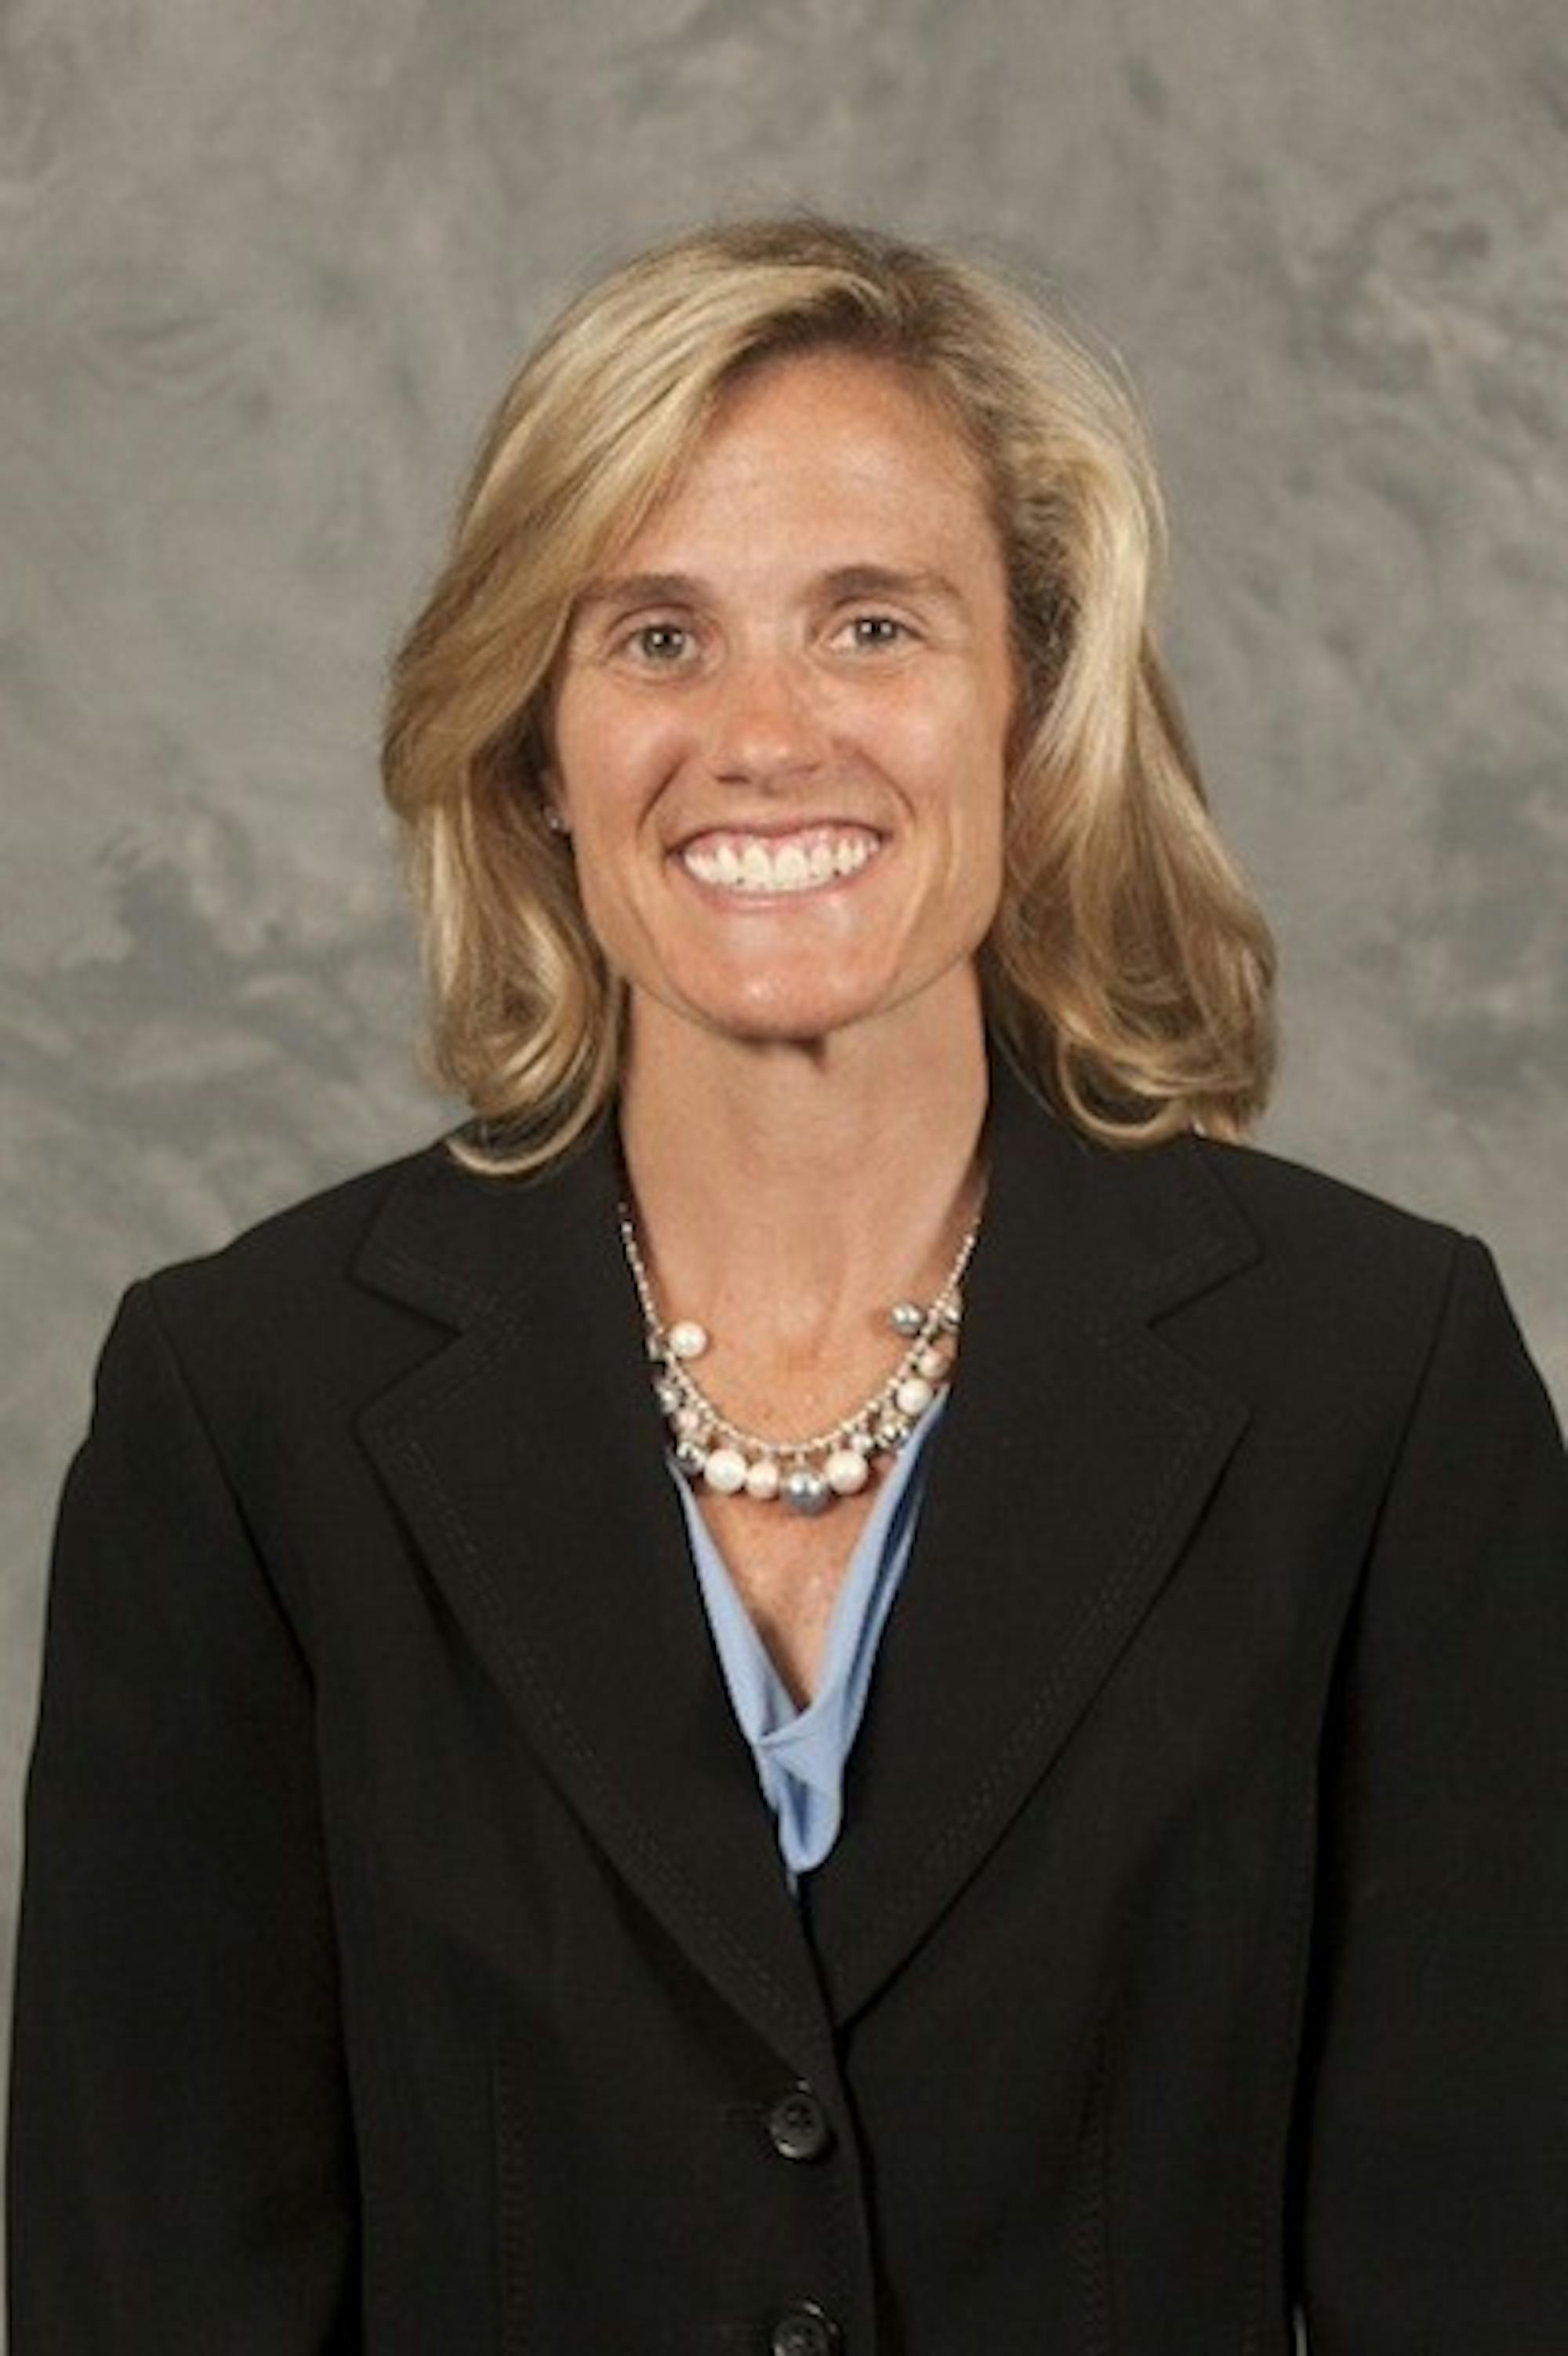 	Heather Lyke comes to EMU from Ohio State University, where she has been for the last 15 years.